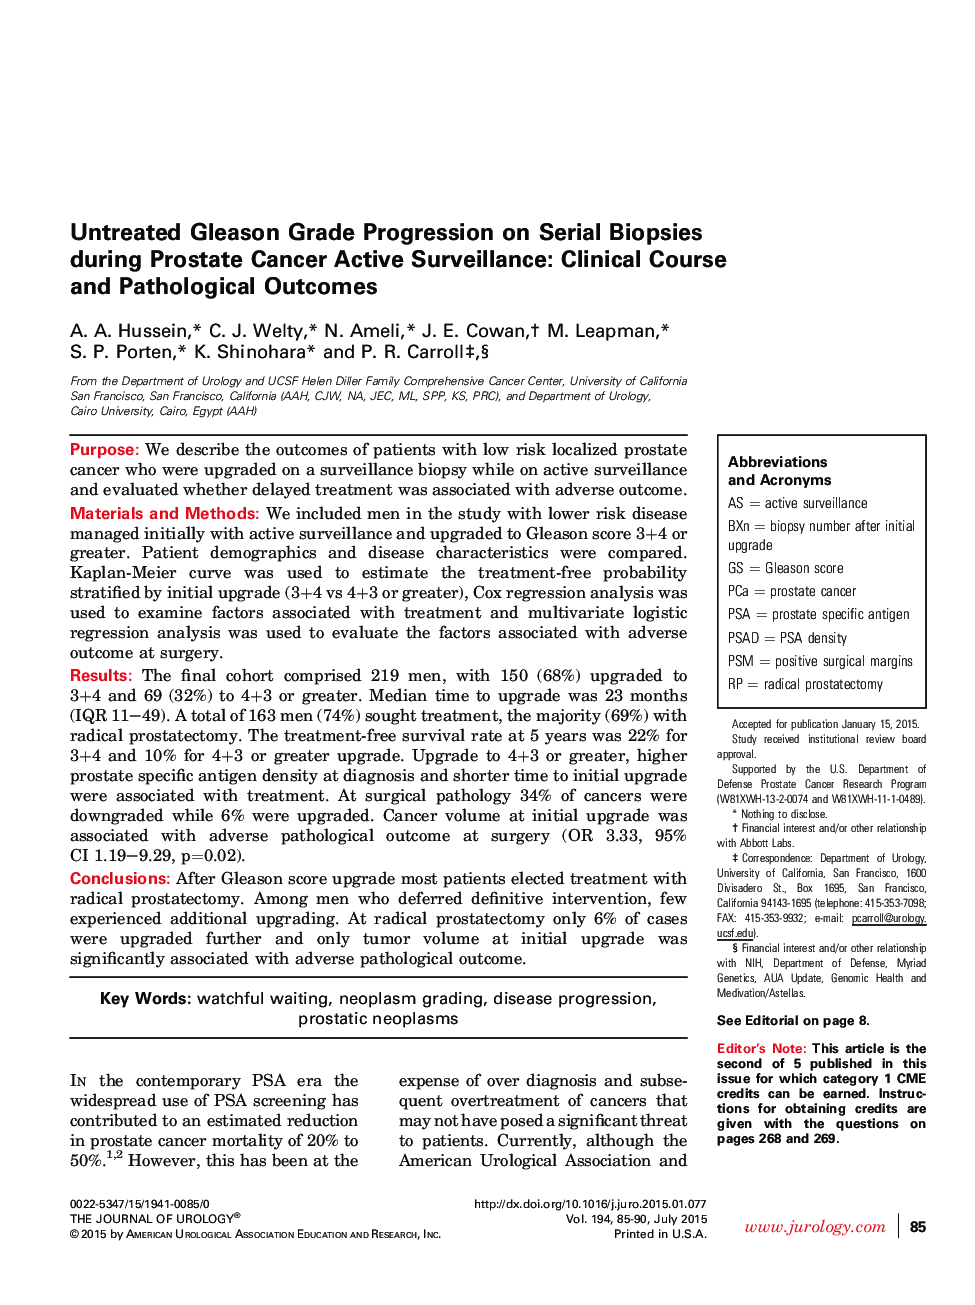 Untreated Gleason Grade Progression on Serial Biopsies during Prostate Cancer Active Surveillance: Clinical Course and Pathological Outcomes 